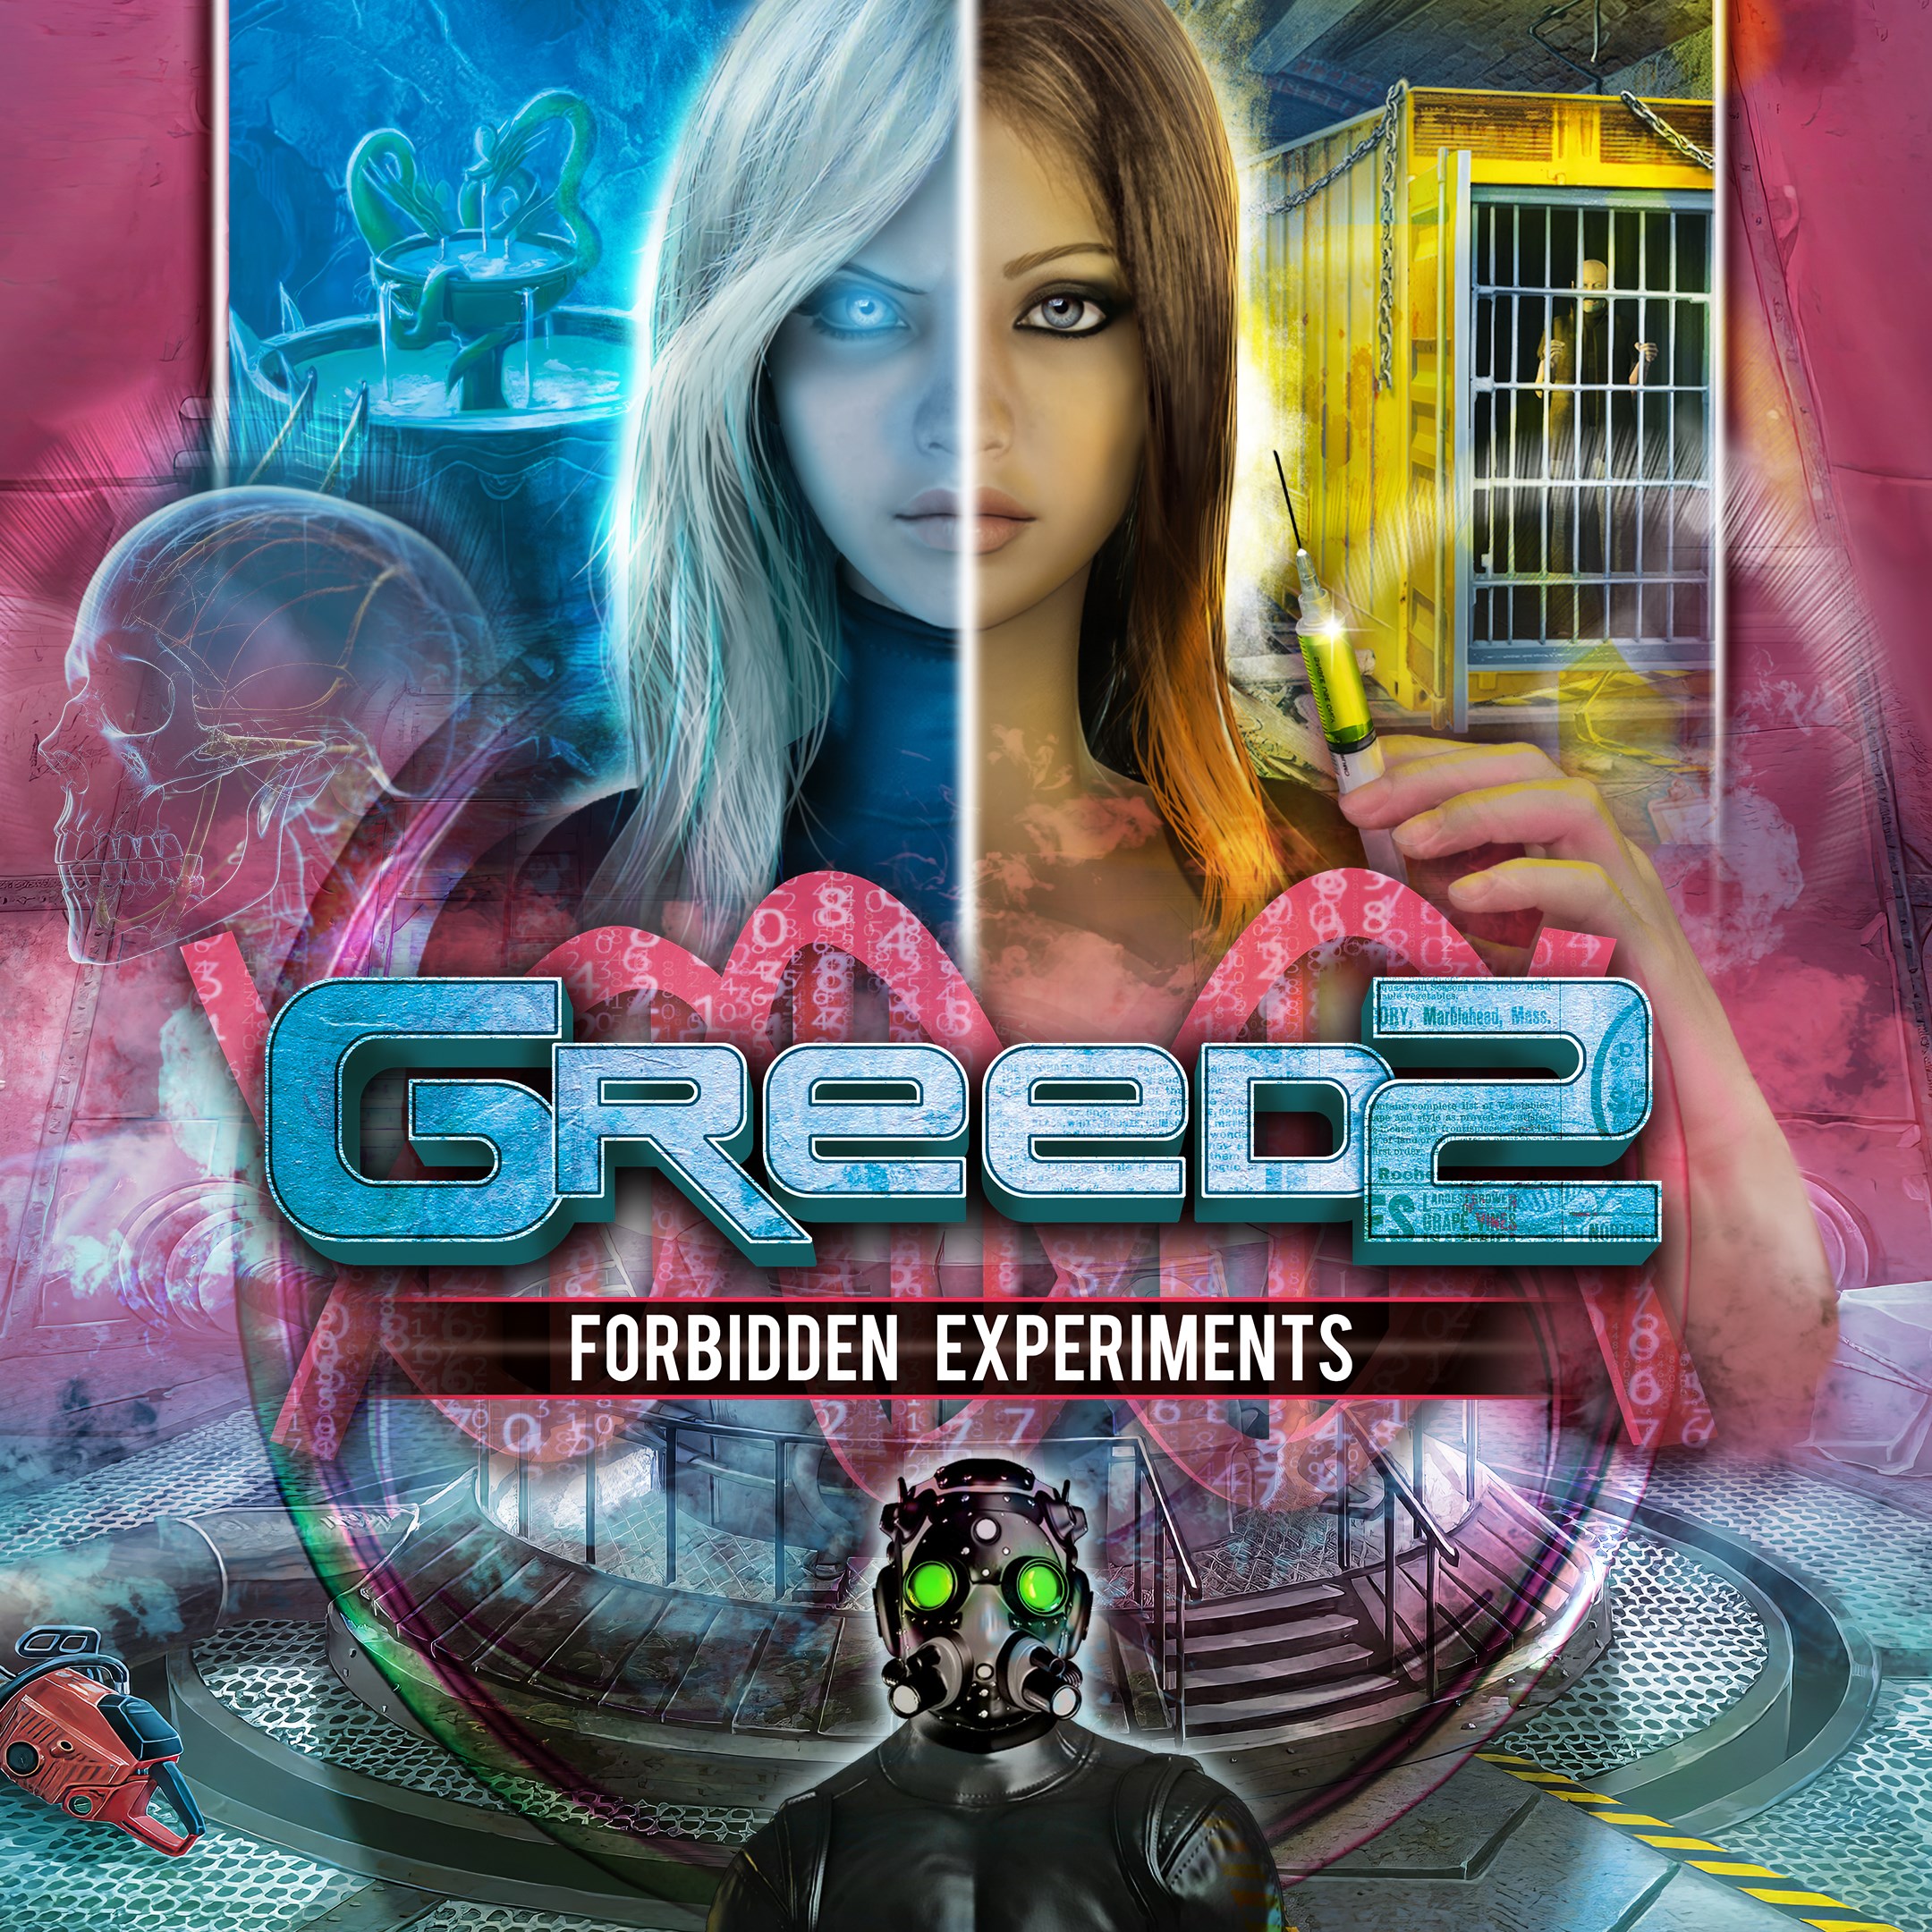 Image for Greed 2: Forbidden Experiments